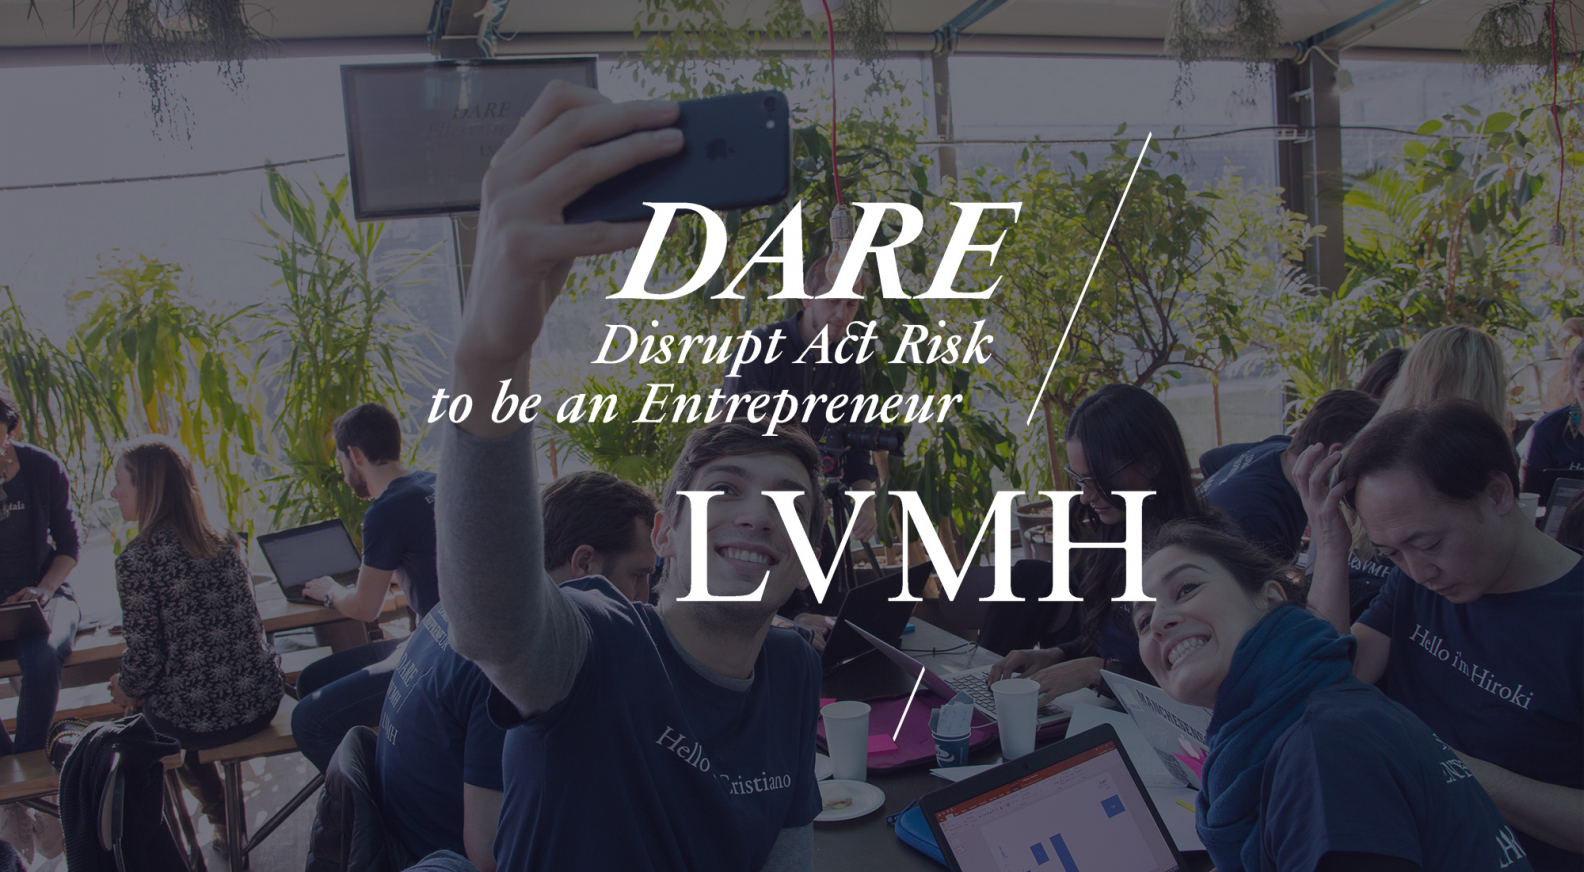 So excited to launch in Shanghai the 4th DARE LVMH - intrapreneurs